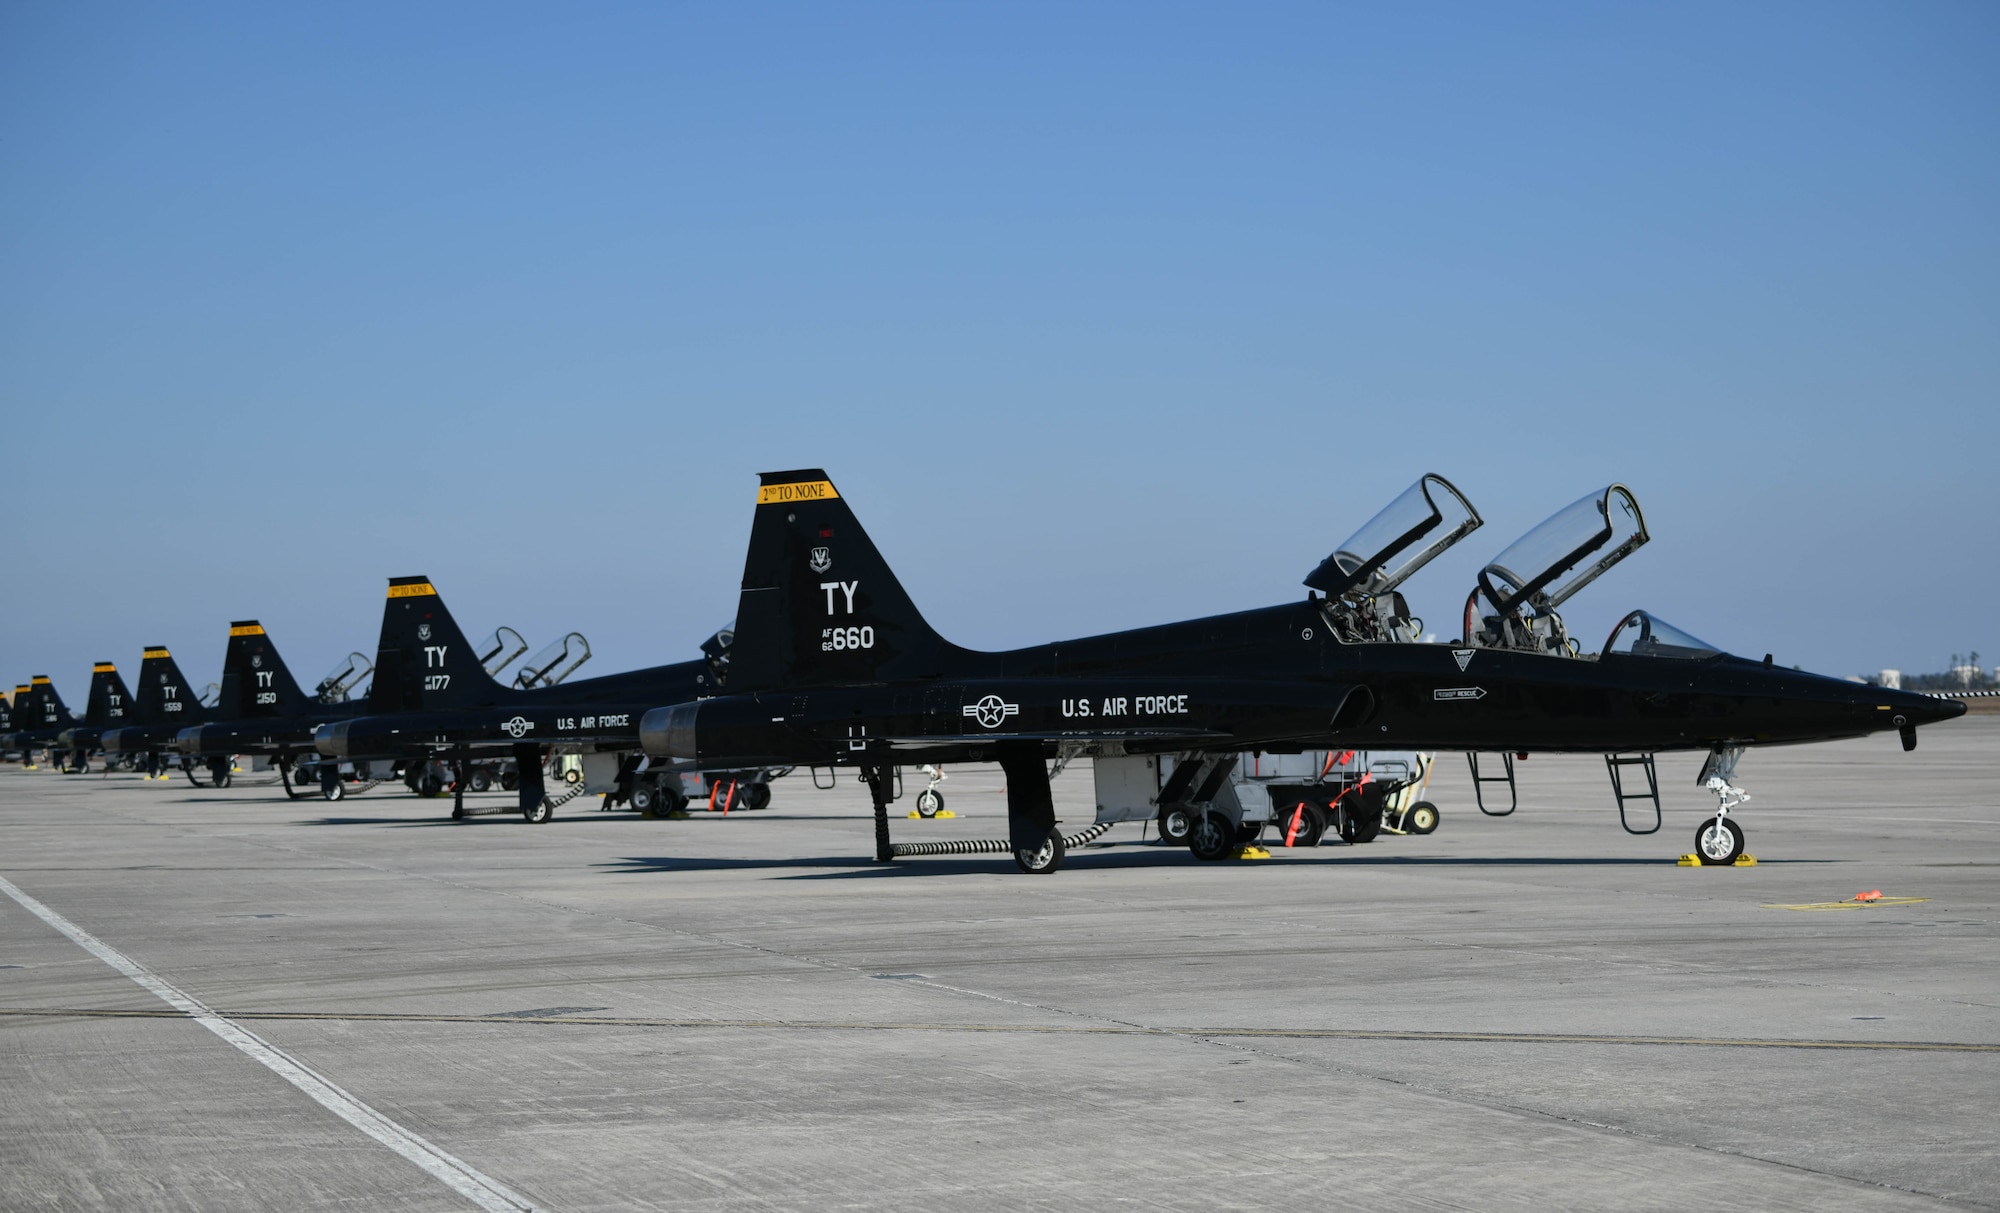 A row of T-38 Talons sit at Tyndall Air Force Base